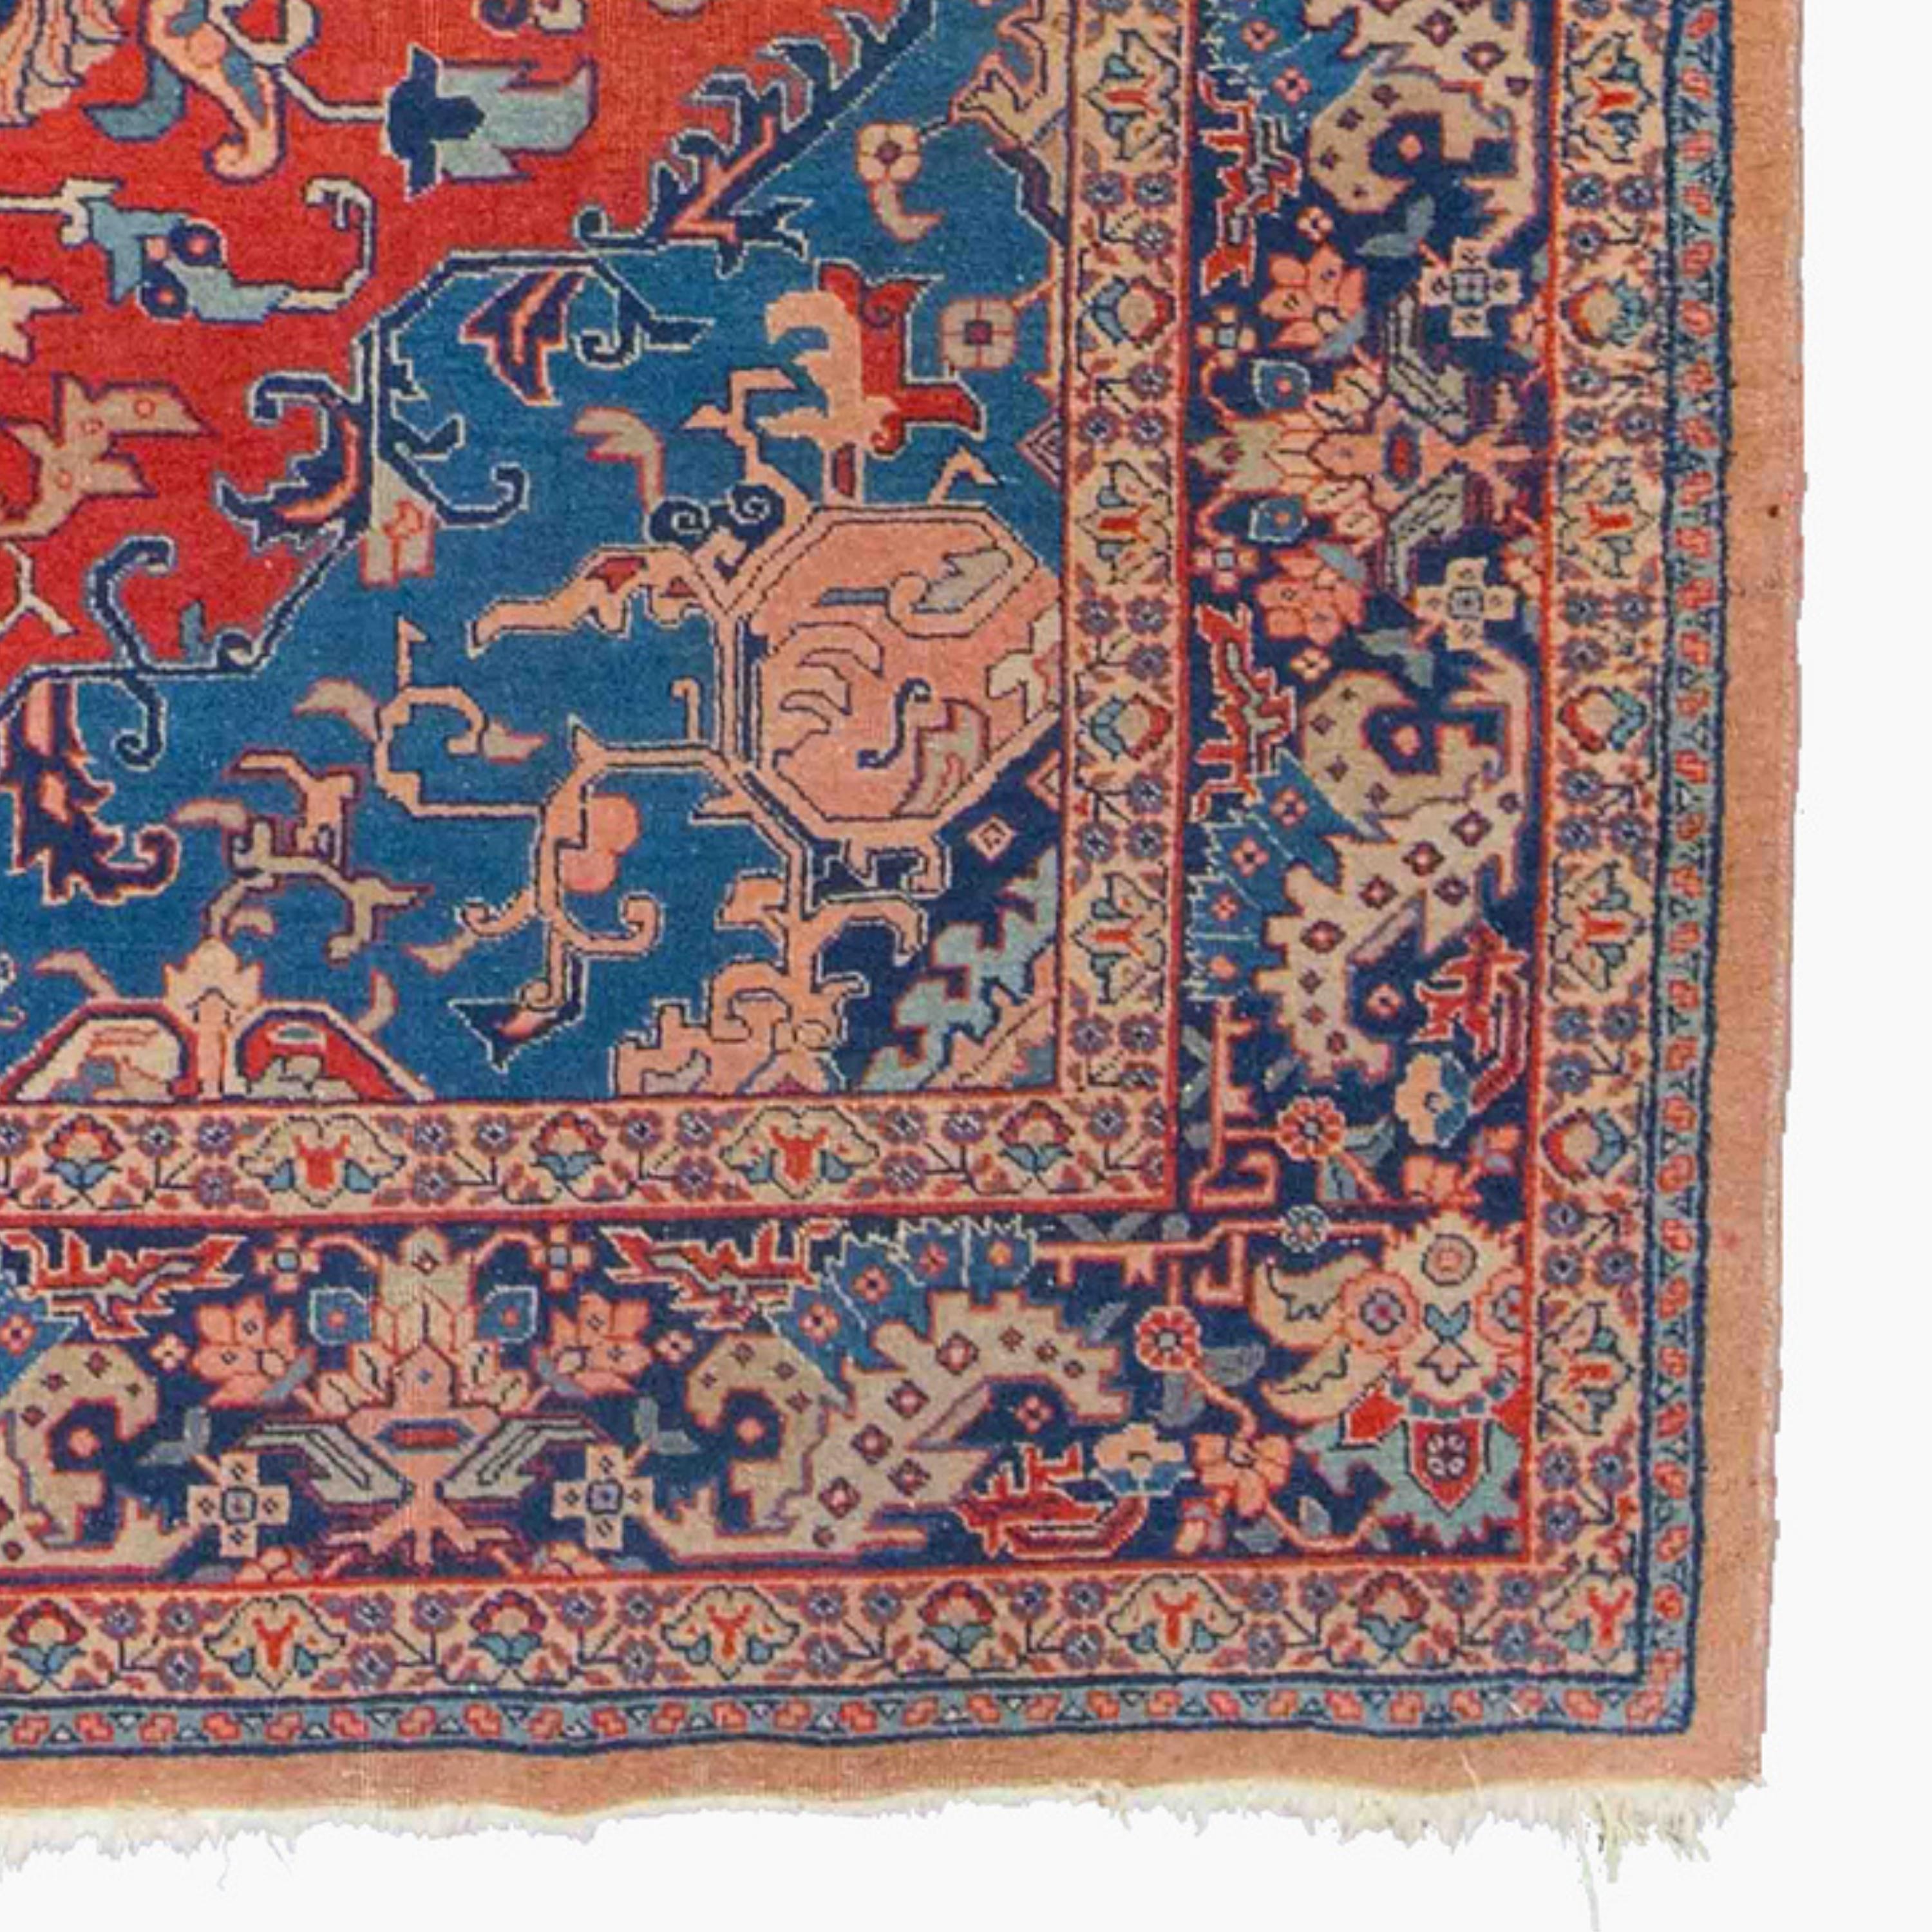 Wool Antique Tabriz Rug - Late of 19th Century Tebriz Rug in Good Condition For Sale